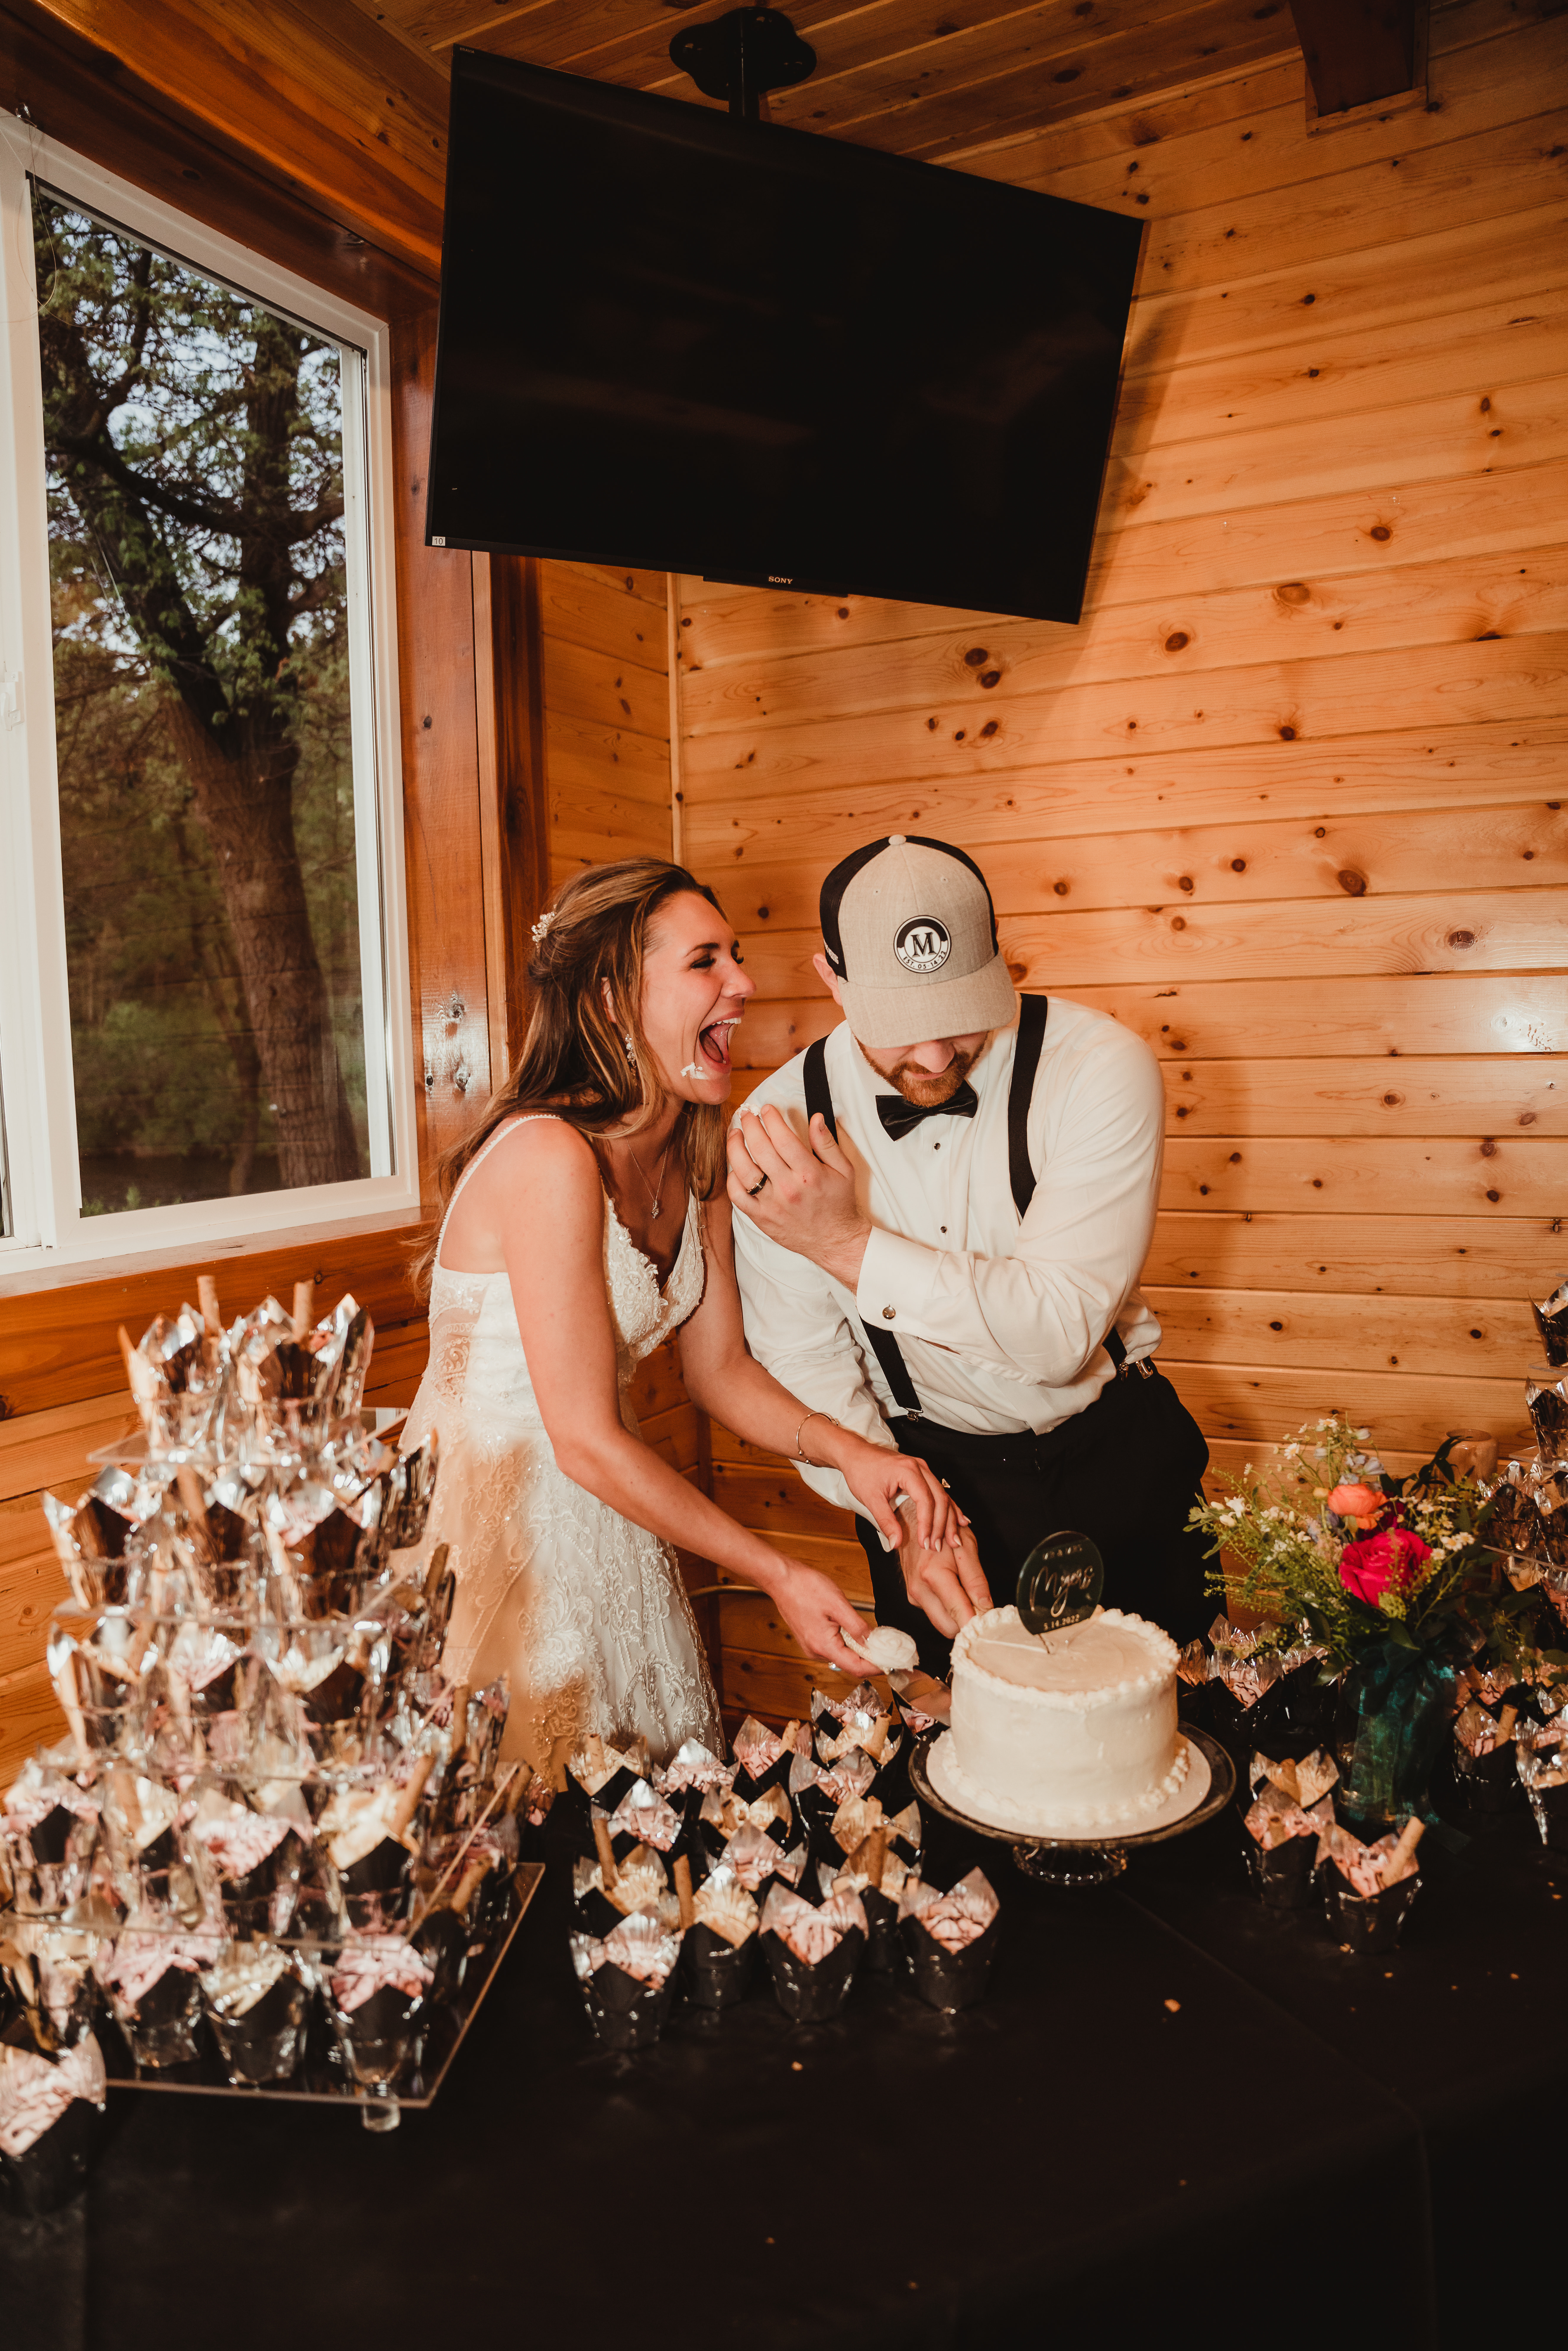 A happy bride and groom cut into their white wedding cake together at their rustic wedding reception. Wisconsin wedding reception Baseball cap groom #forestgreenwedding #rusticweddingvenue #weddingplanning #wisconsinweddingphotographer #wisconsinweddingvenue
